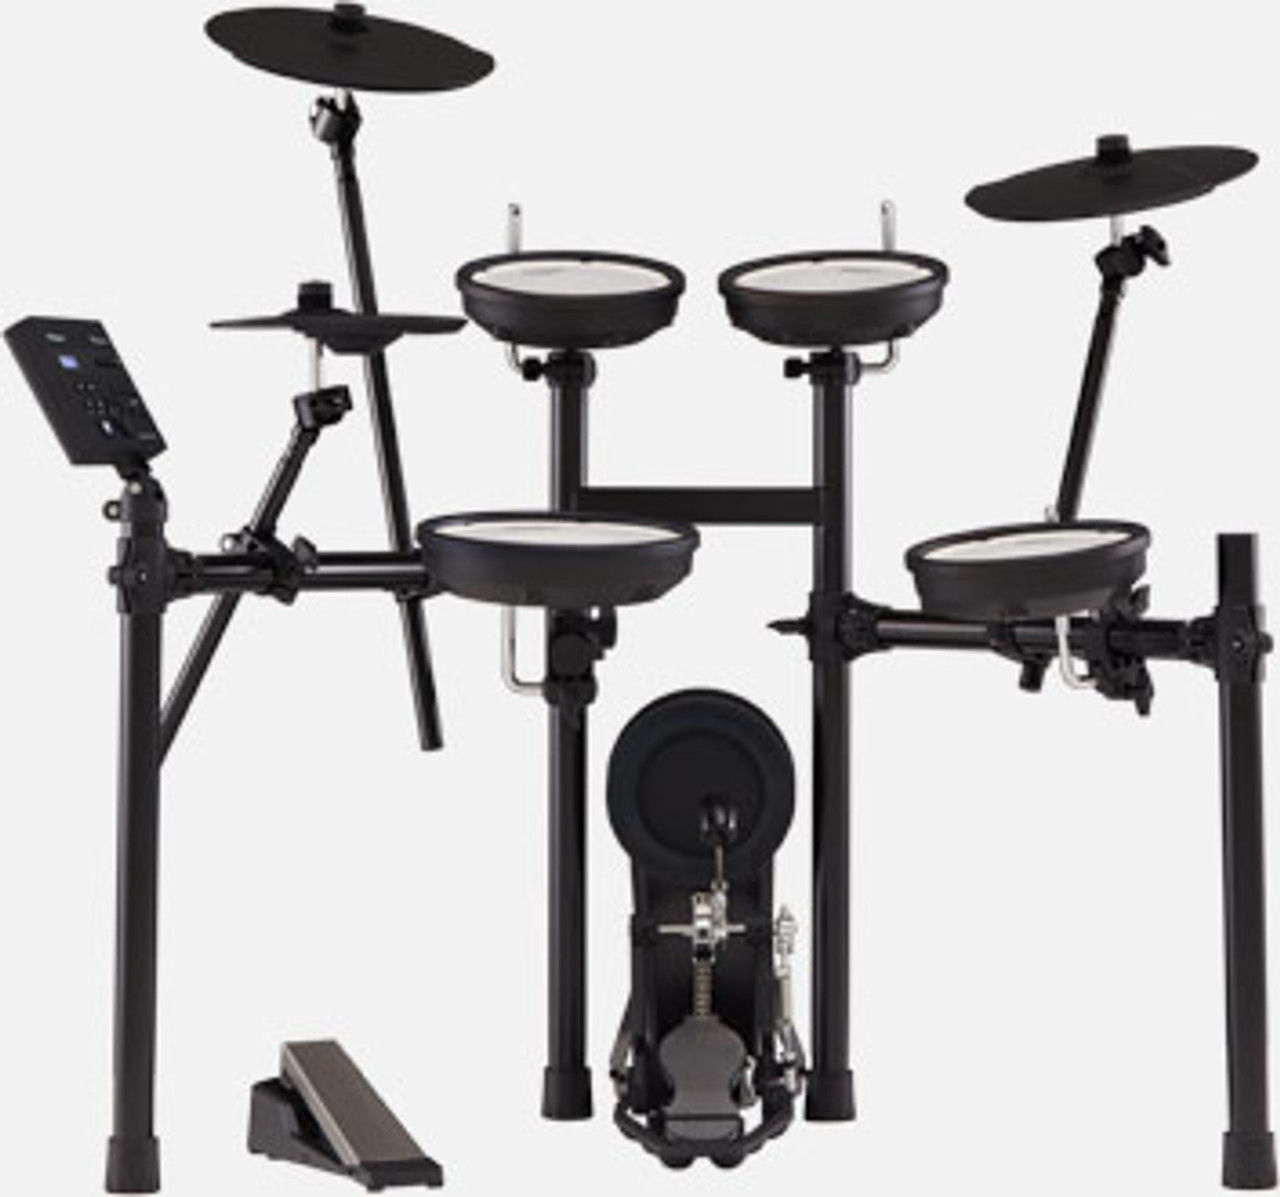 The superior expression and playability of high-end V-Drums in an affordable drum kit for playing at home.